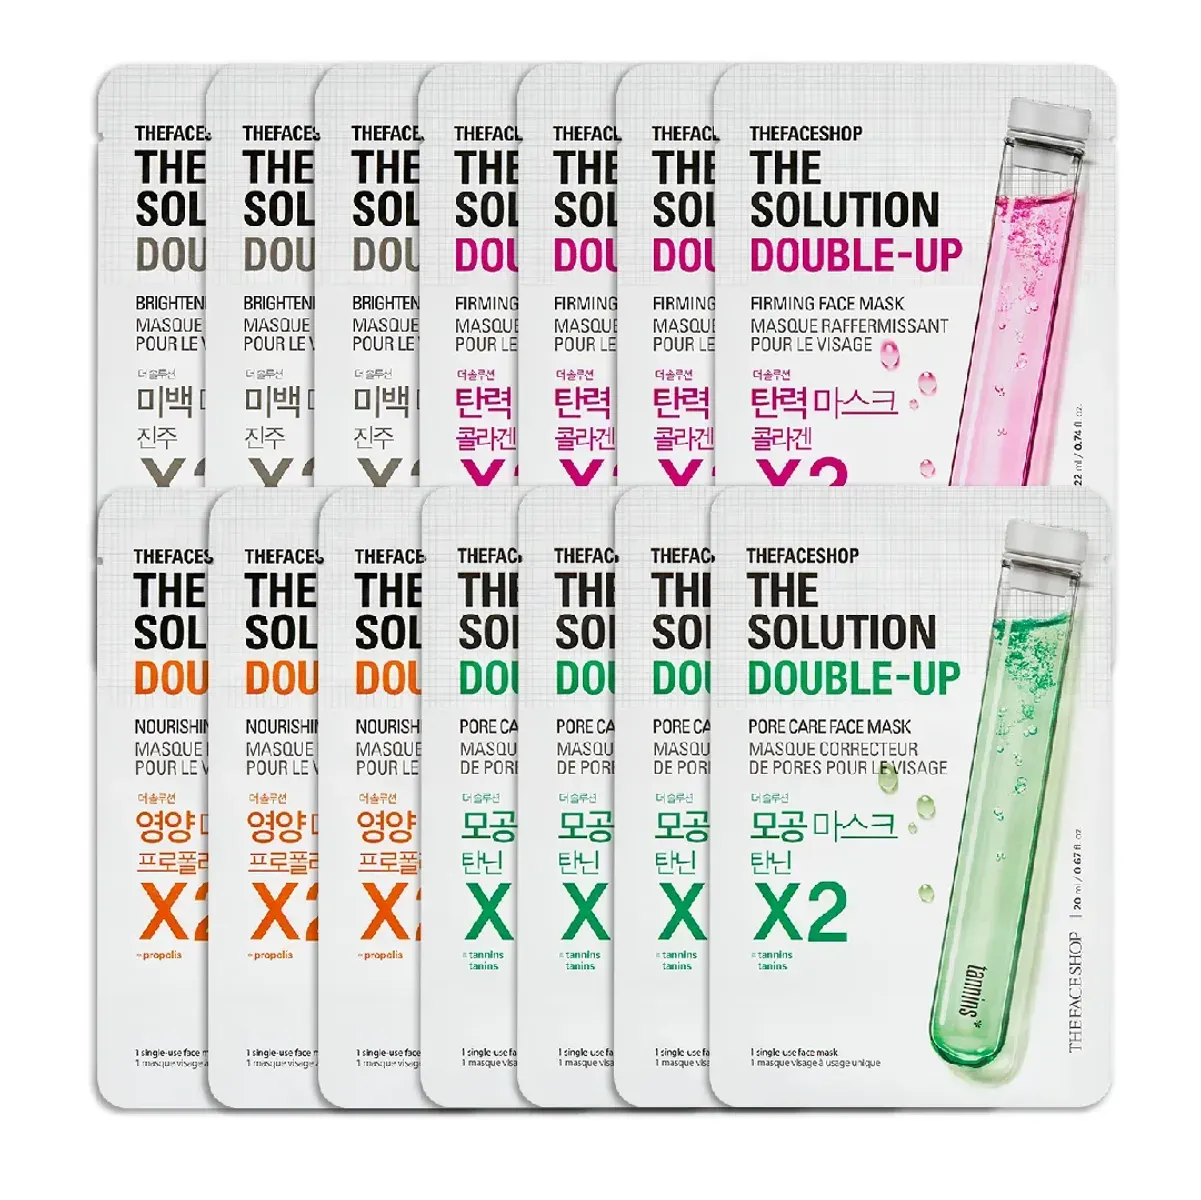 combo-mix-14-mat-na-thefaceshop-the-solution-double-up-20ml-1